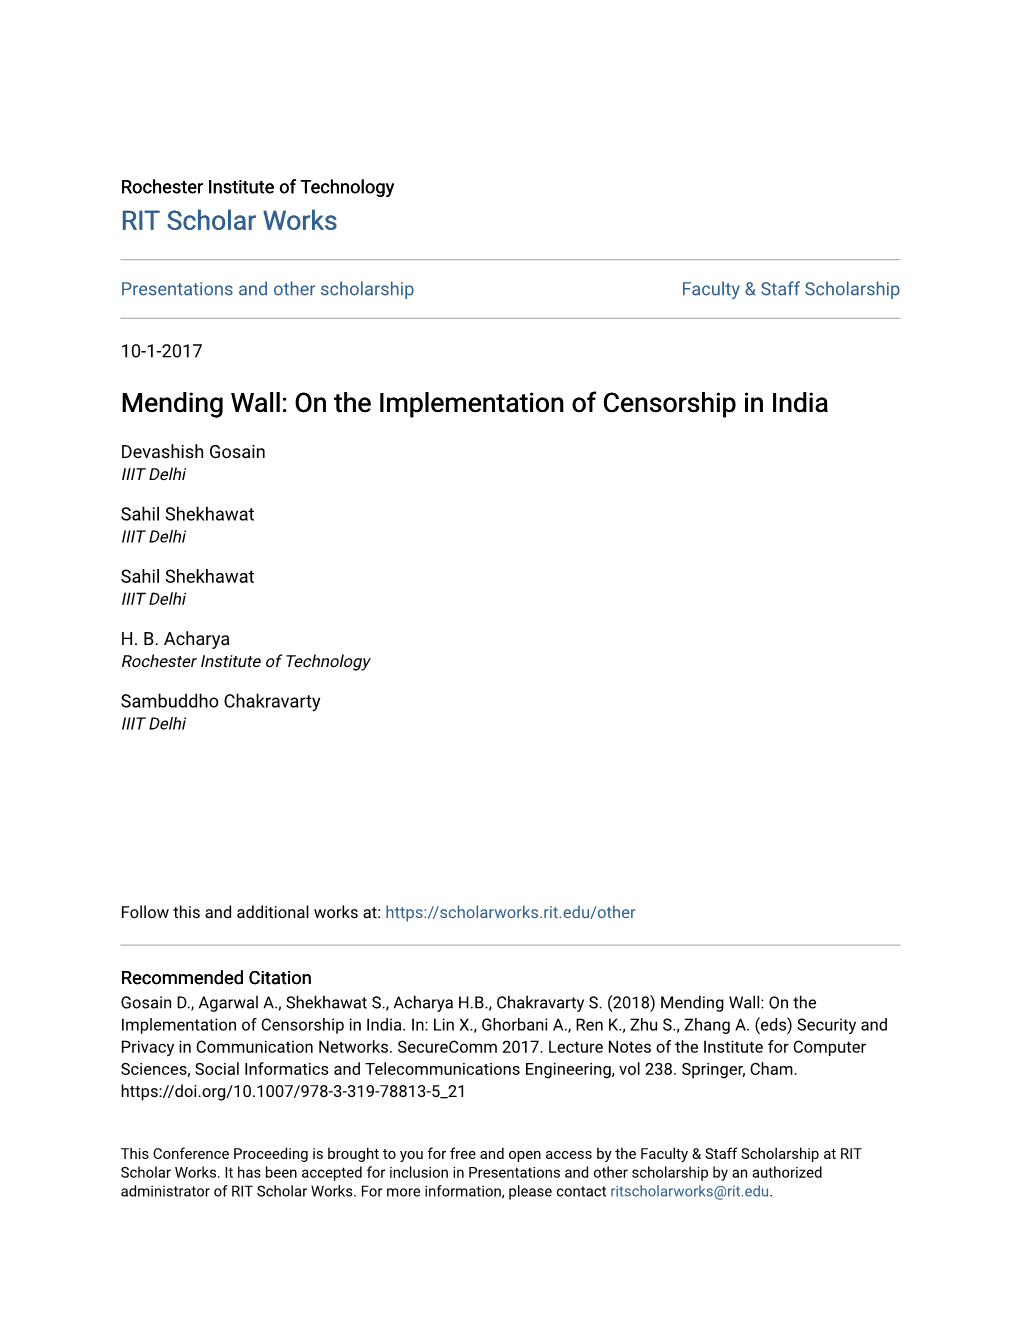 Mending Wall: on the Implementation of Censorship in India